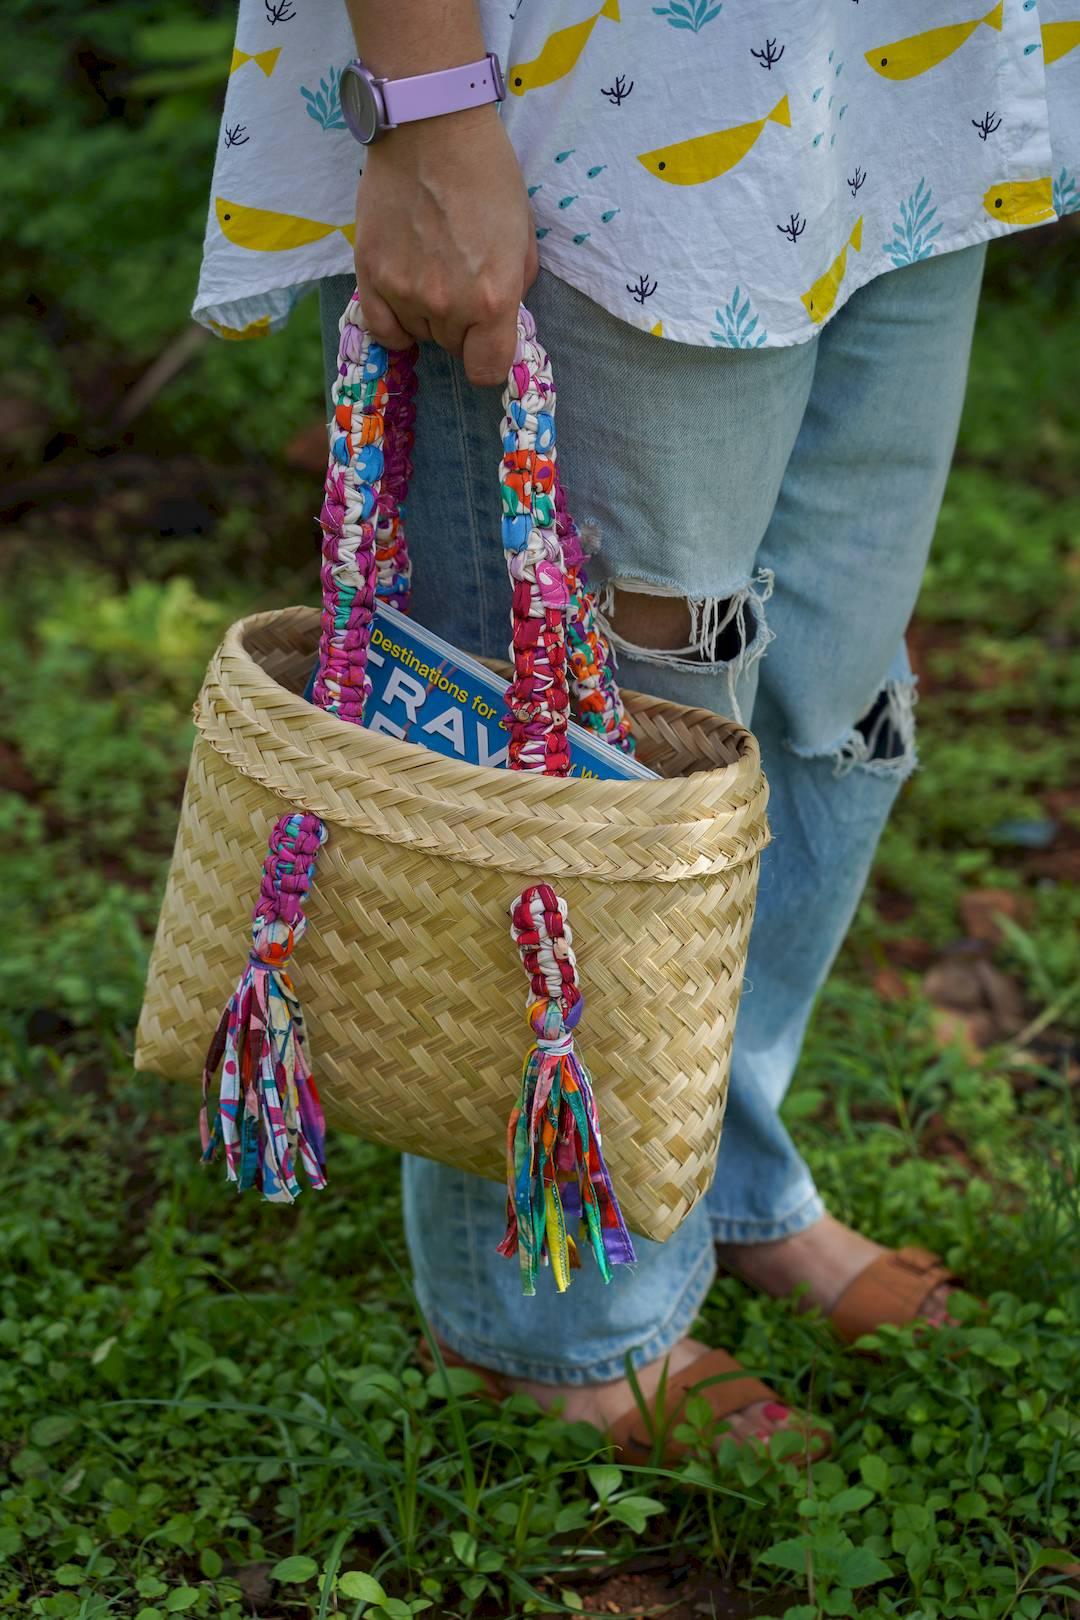 Handwoven Moira bag made by women artisans using locally sourced bamboo